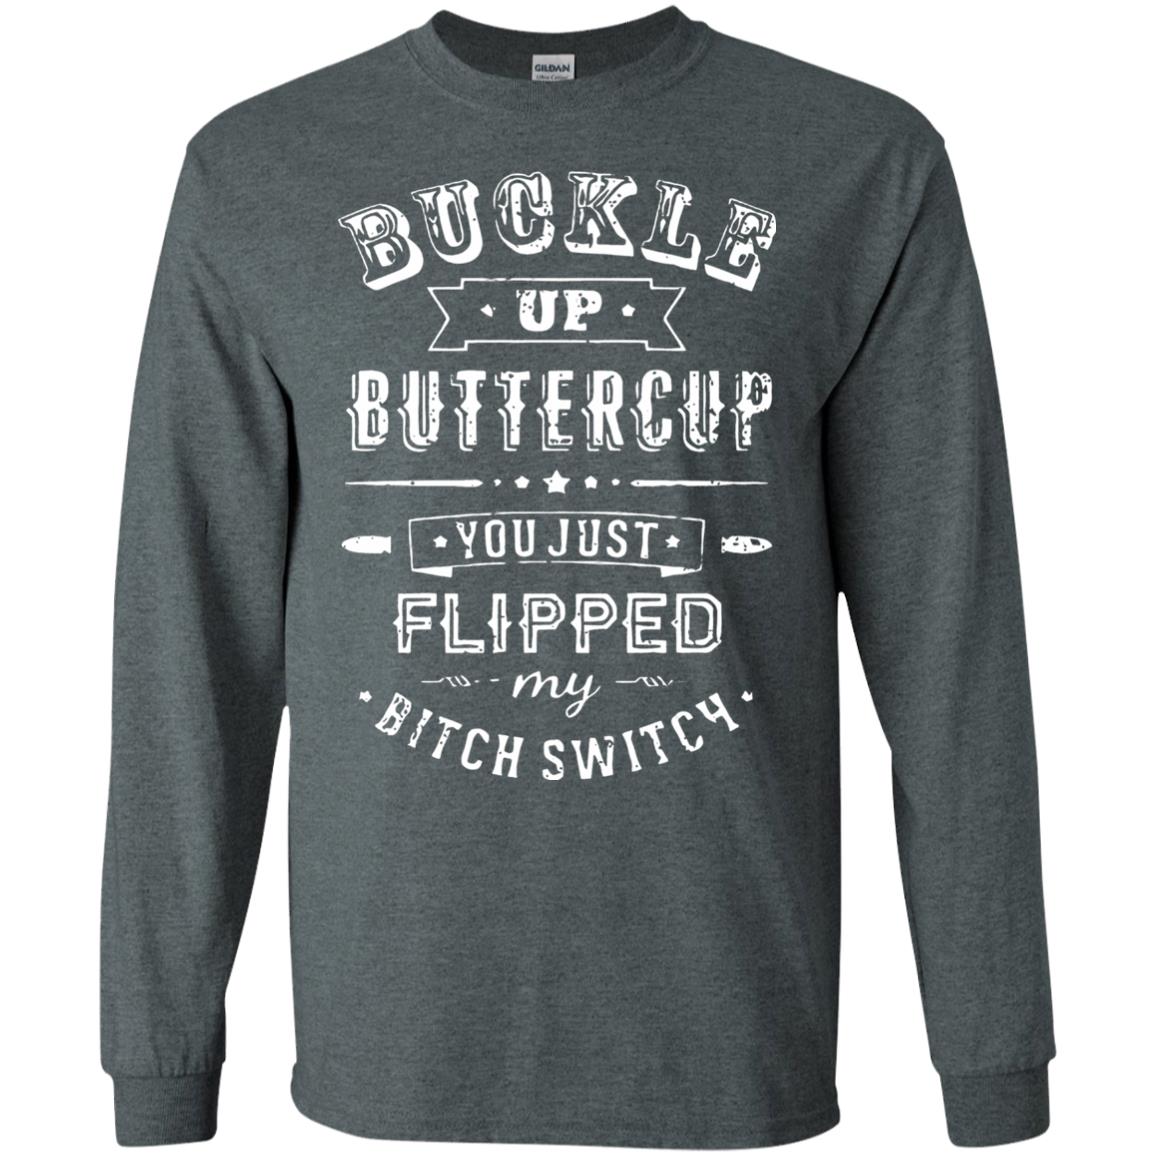 buckle up buttercup you just flipped long sleeve - dark heather